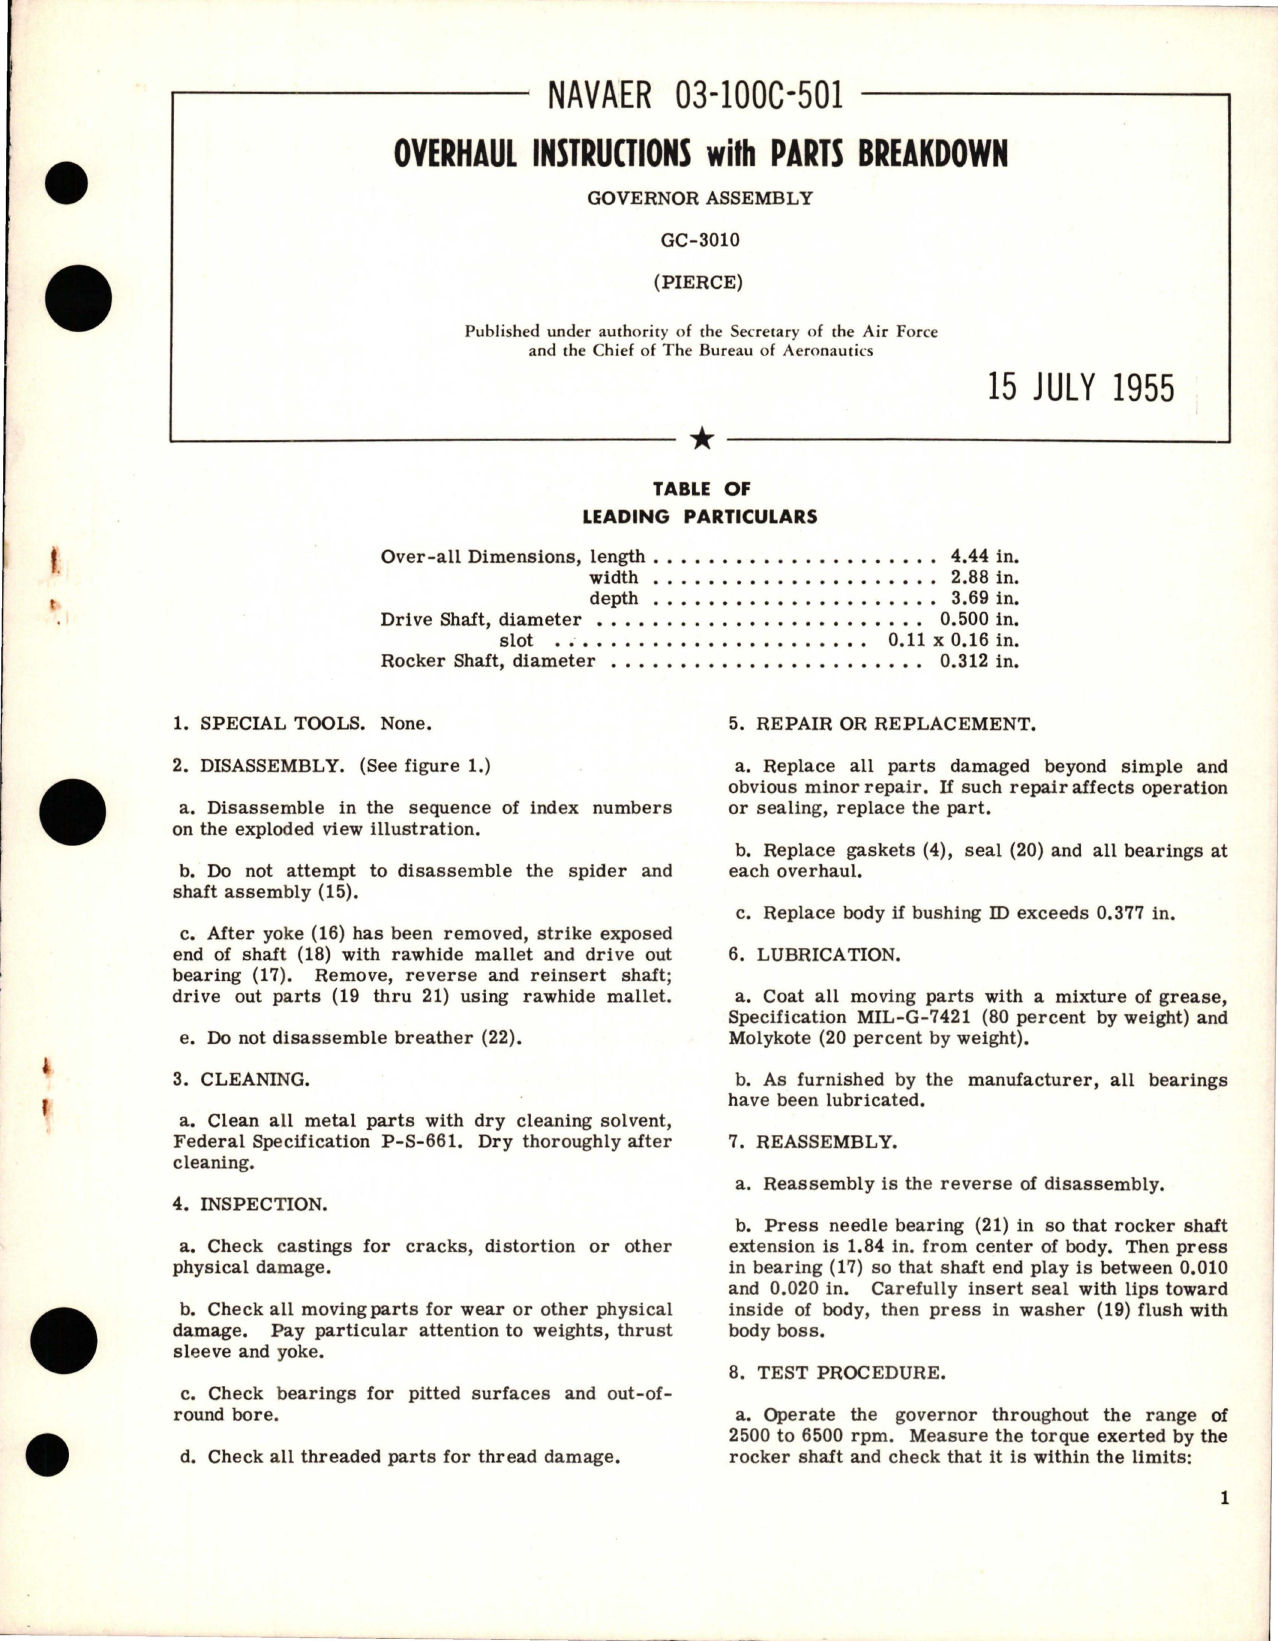 Sample page 1 from AirCorps Library document: Overhaul Instructions with Parts Breakdown for Governor Assembly - GC-3010 